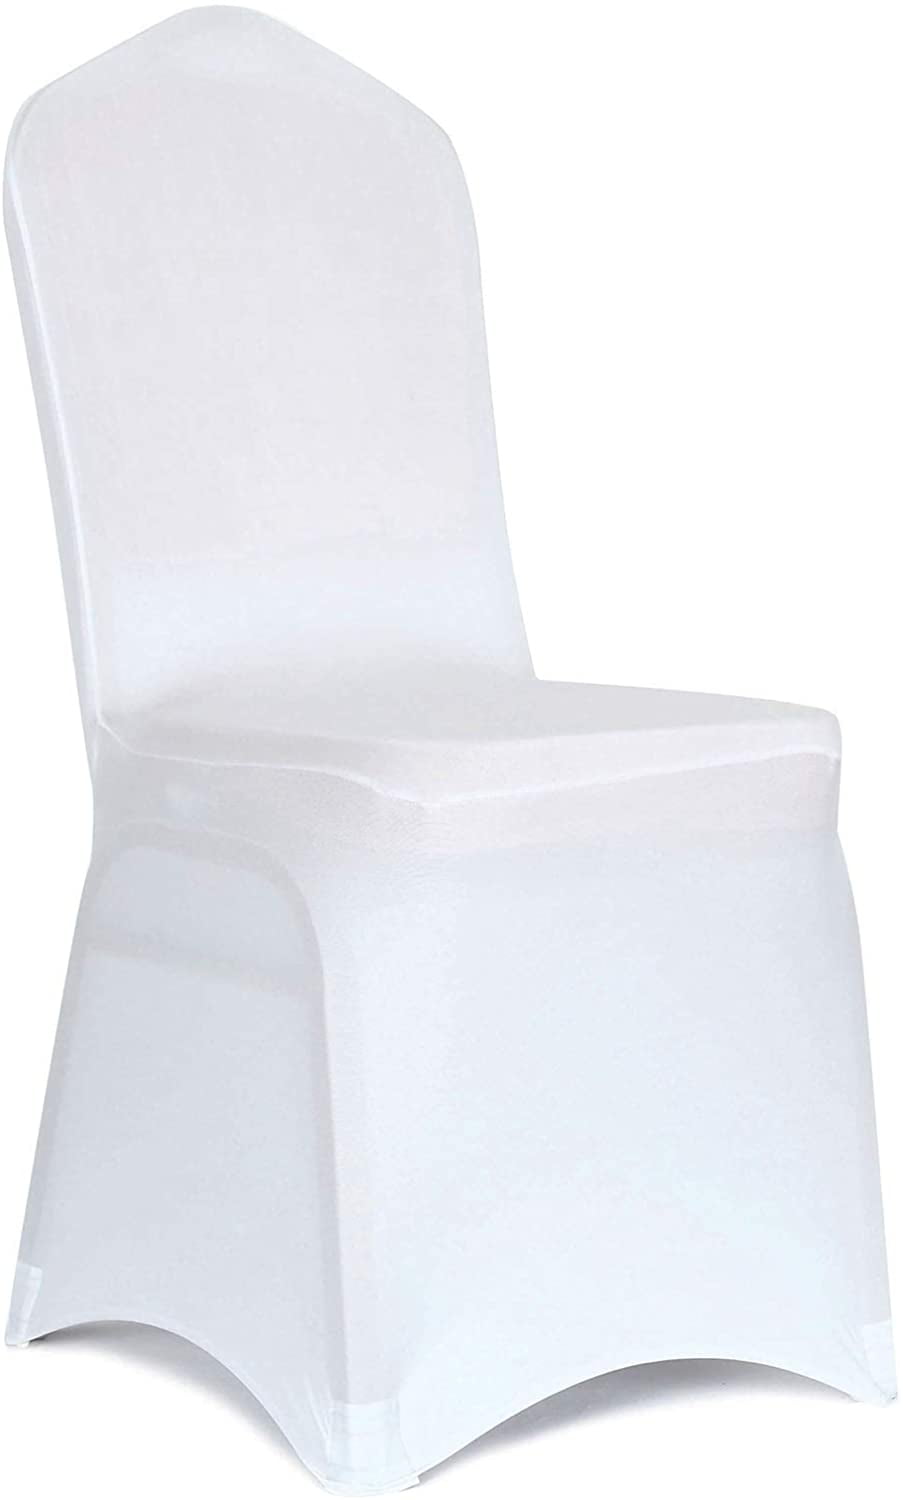 10pcs Dining Room Chair Covers Spandex Slip Cover Stretch Wedding Banquet Party 